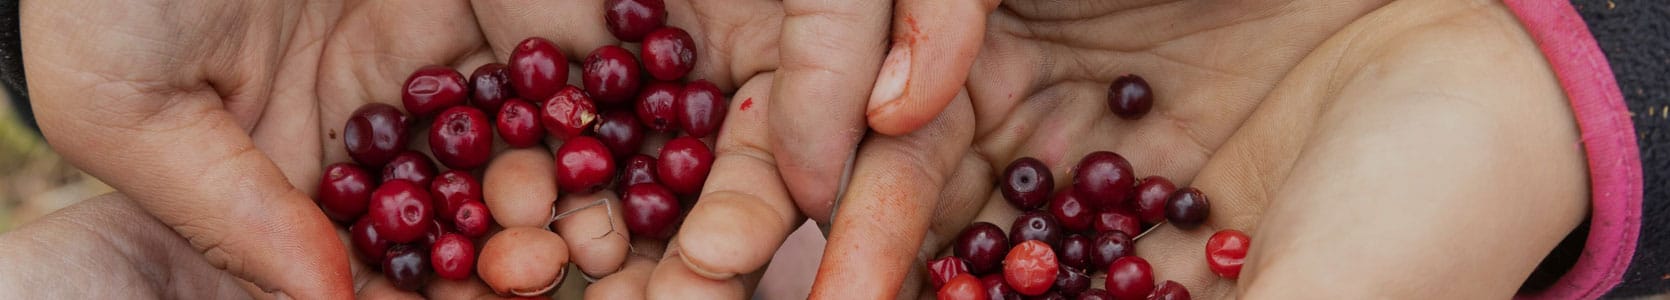 Hands with fresh picked berries.